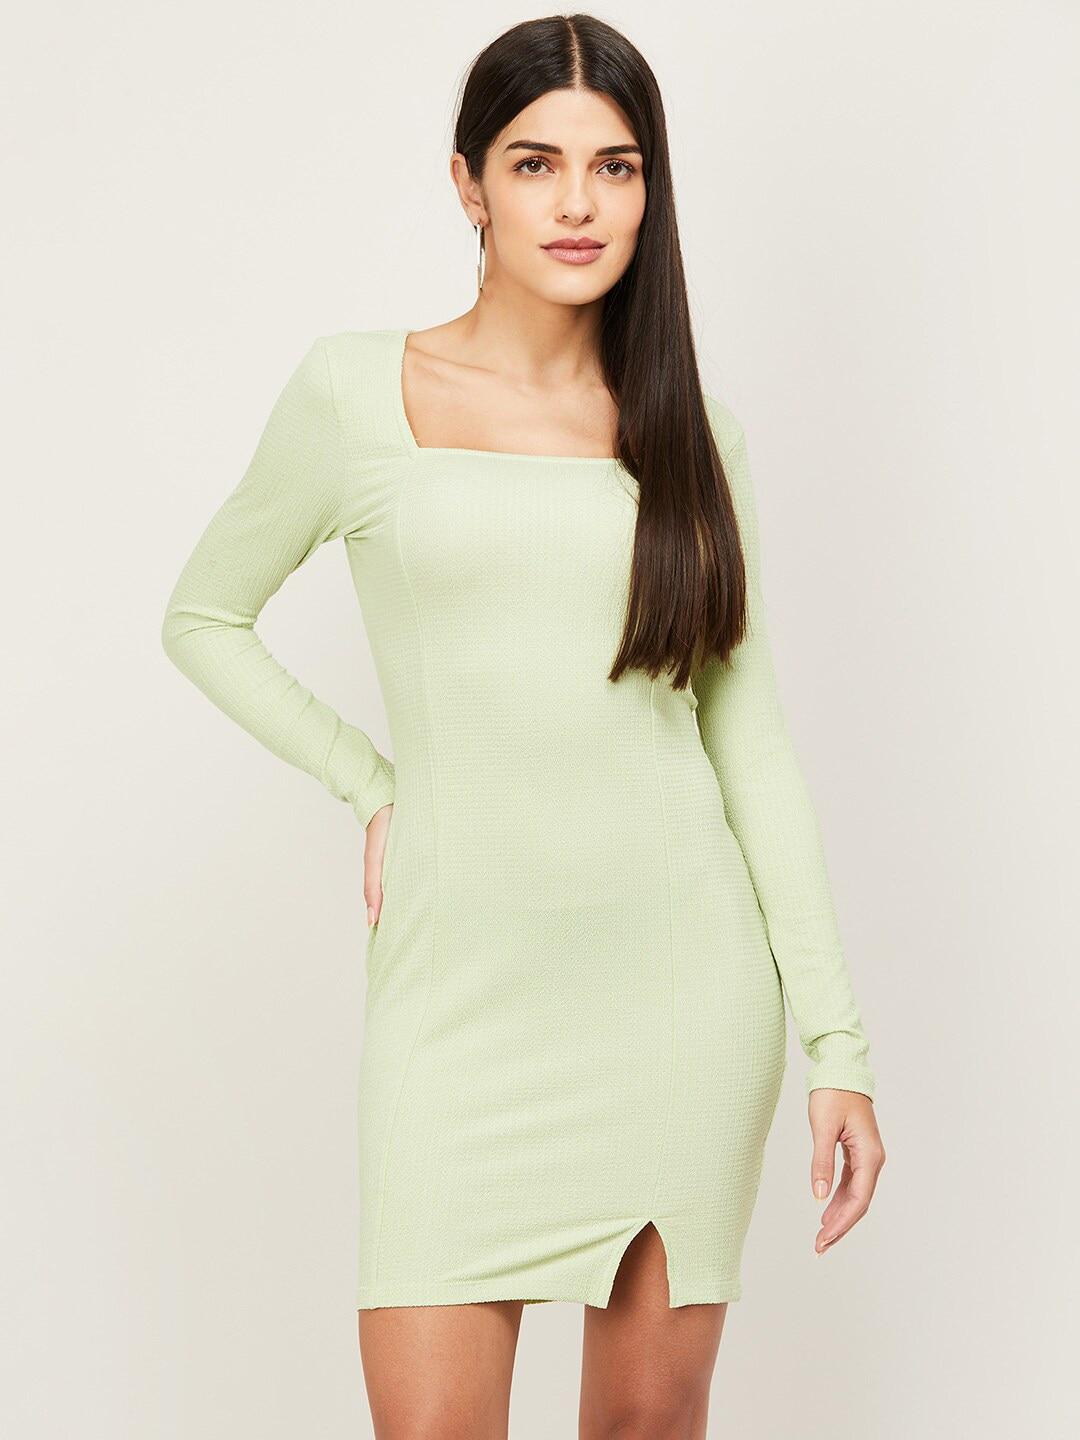 ginger-by-lifestyle-women-green-bodycon-dress